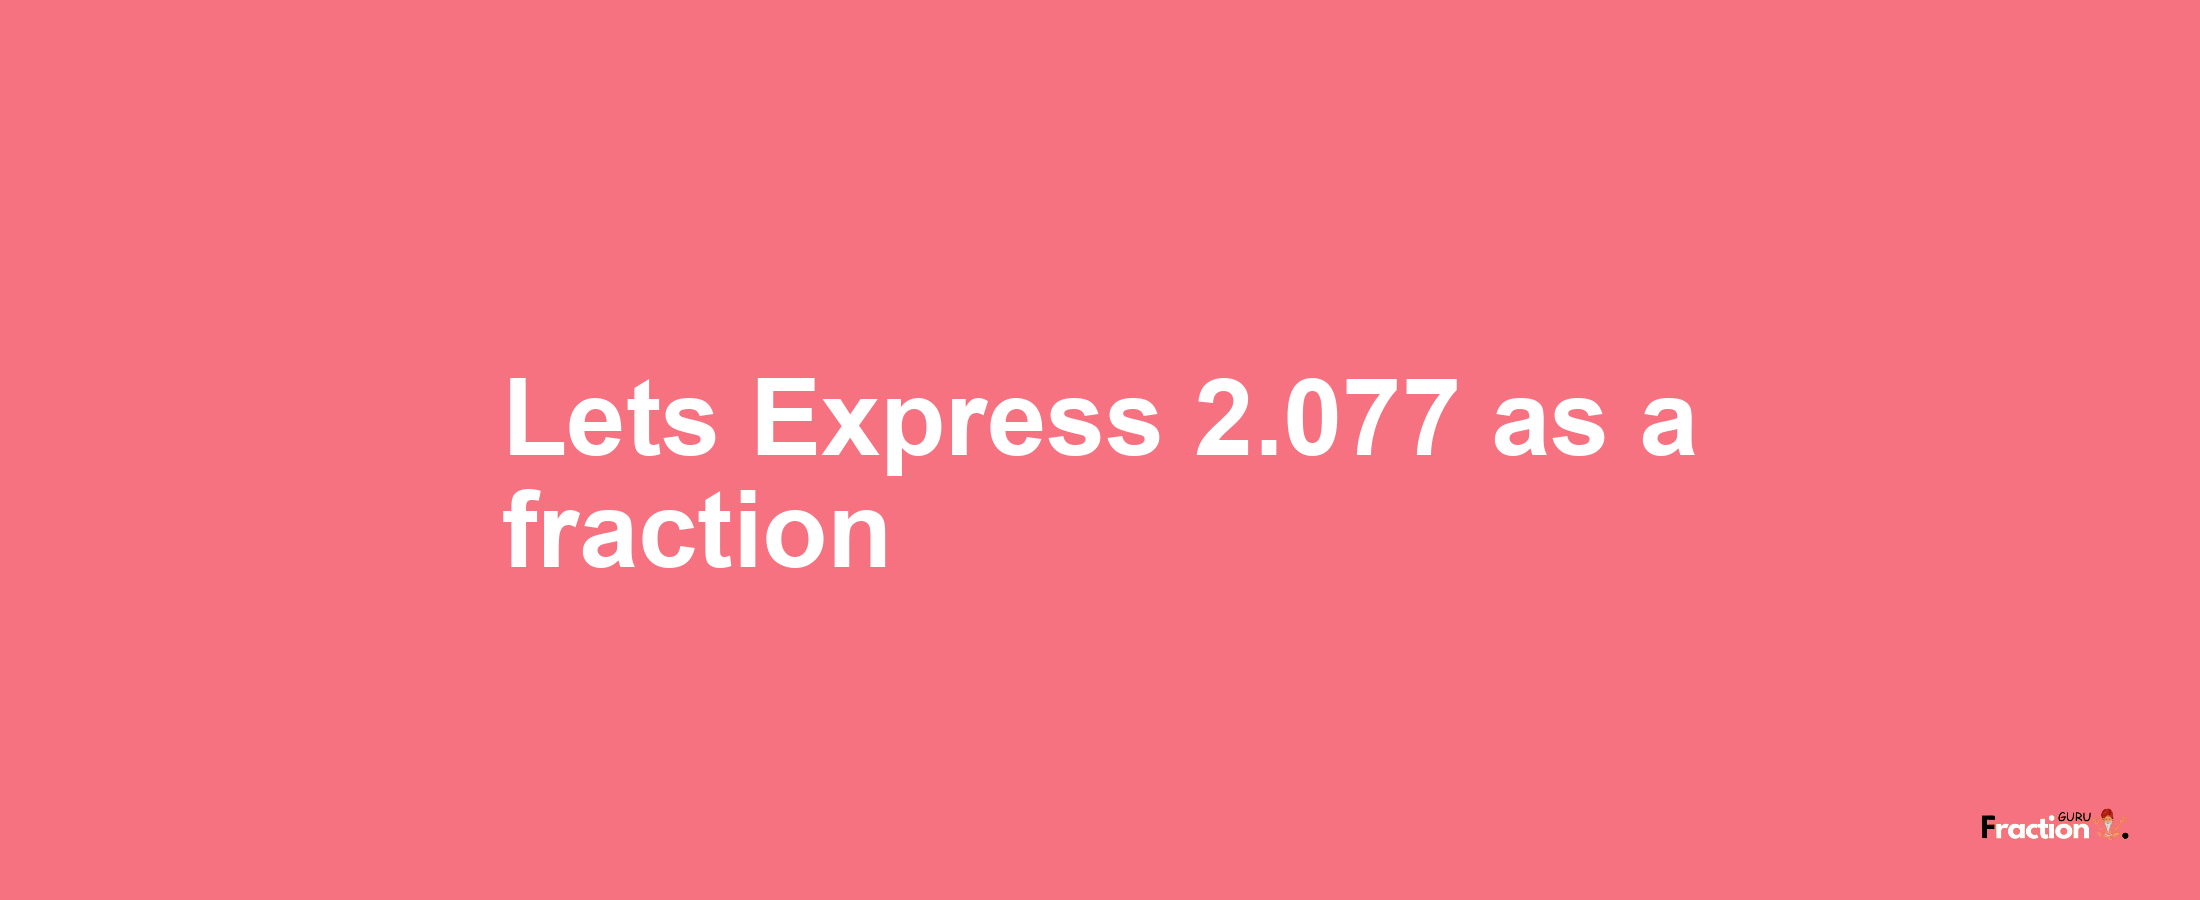 Lets Express 2.077 as afraction